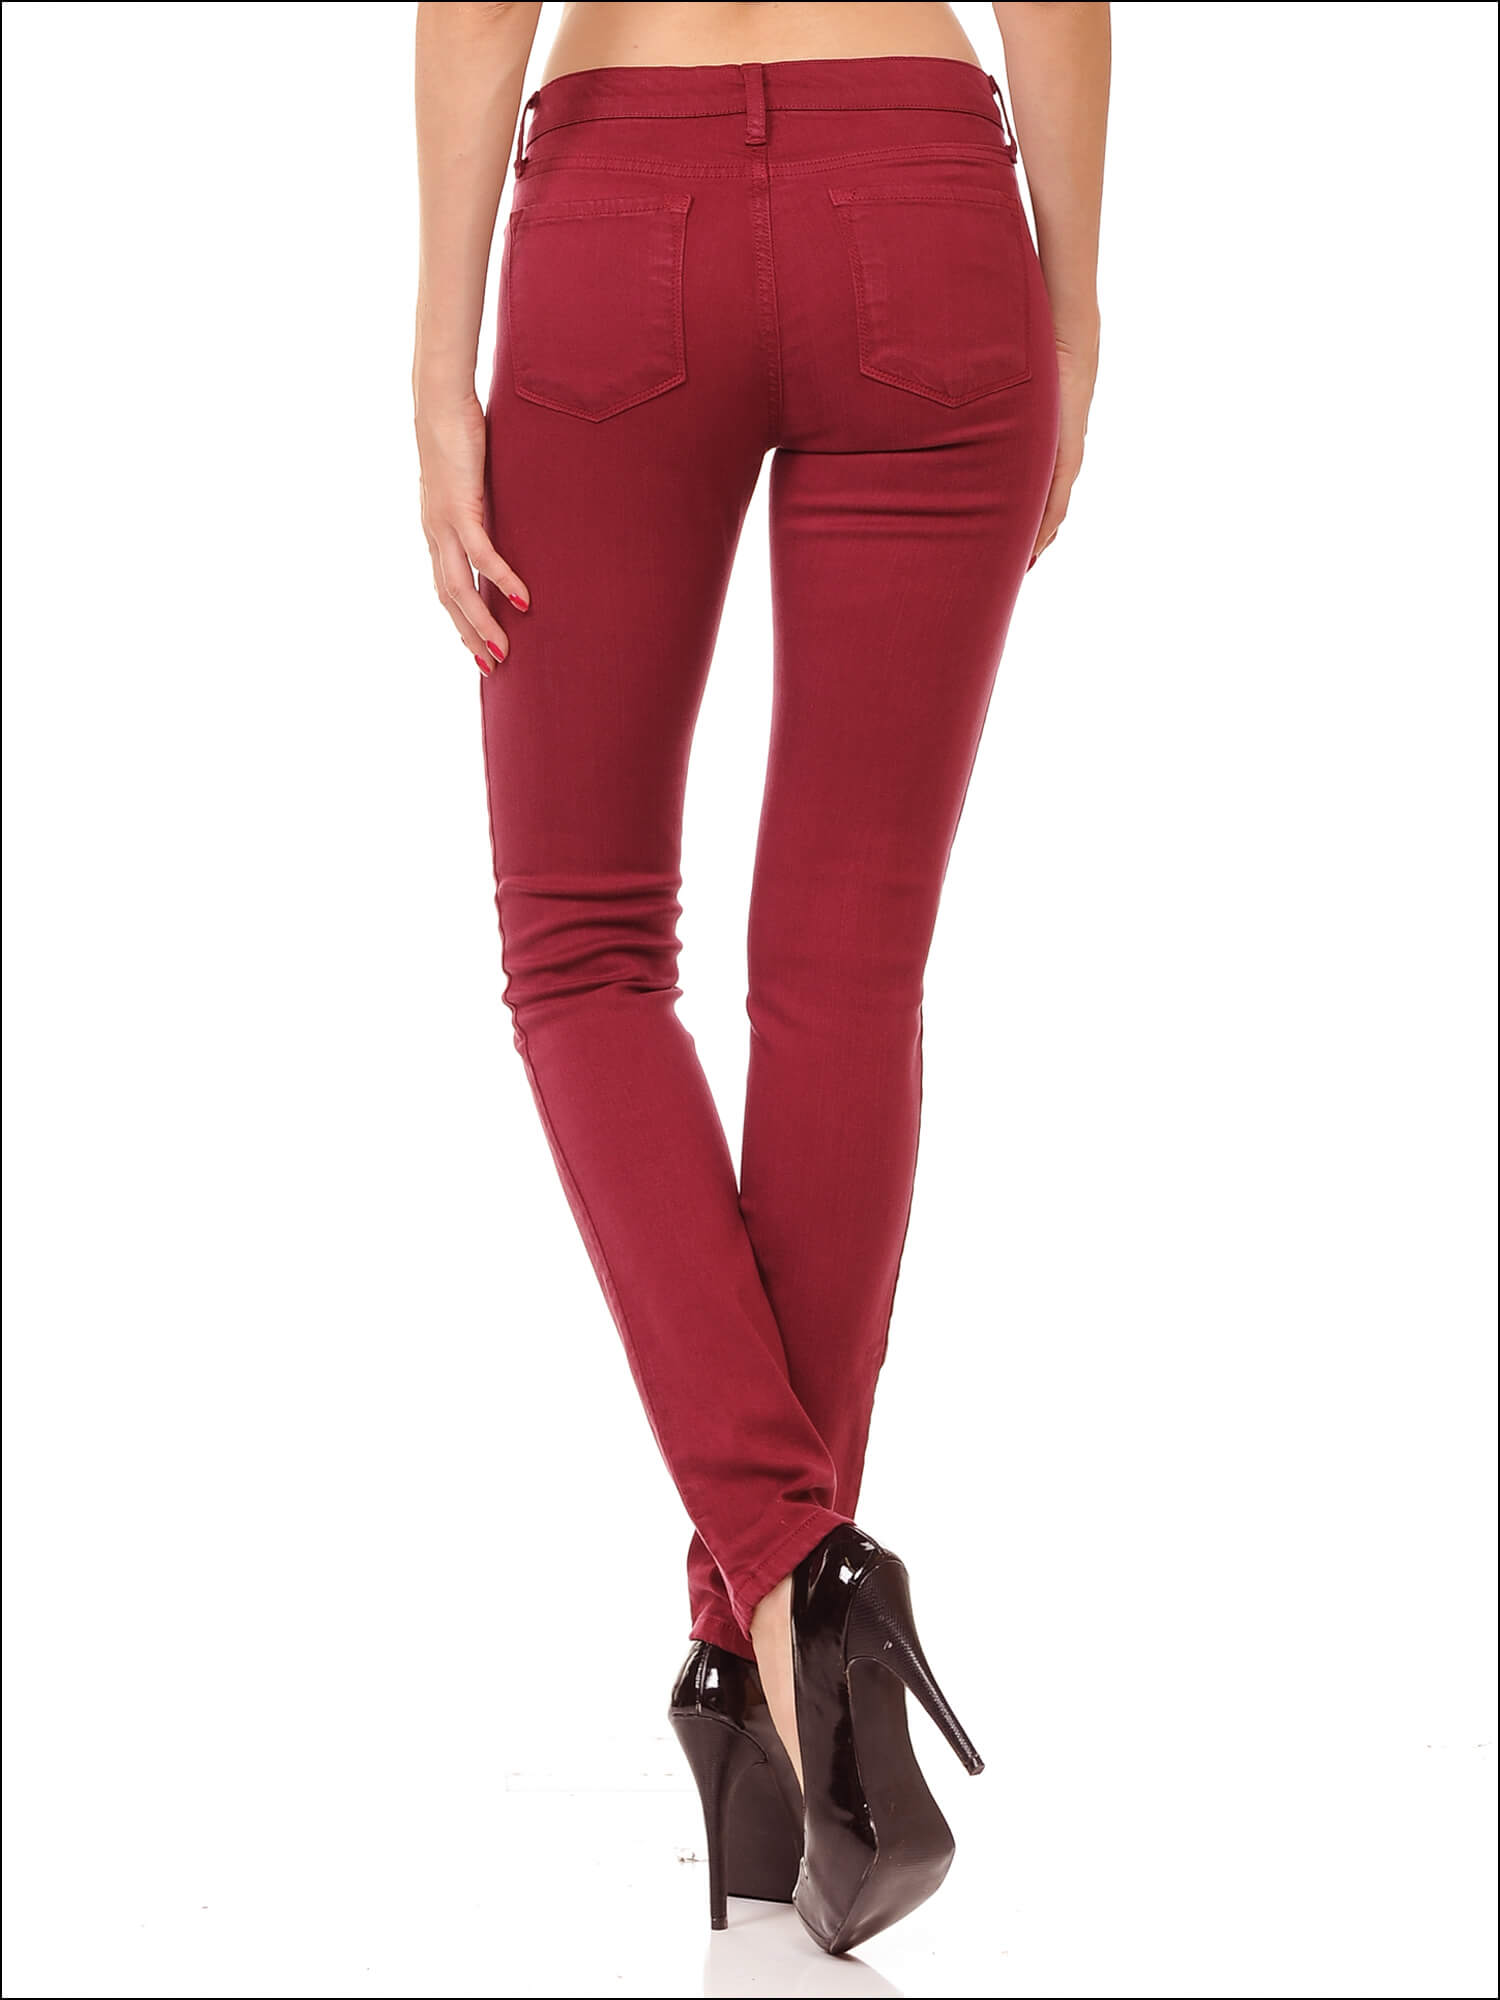 MID RISE BURGUNDY COLOR SKINNY JEANS - Angry Rabbit